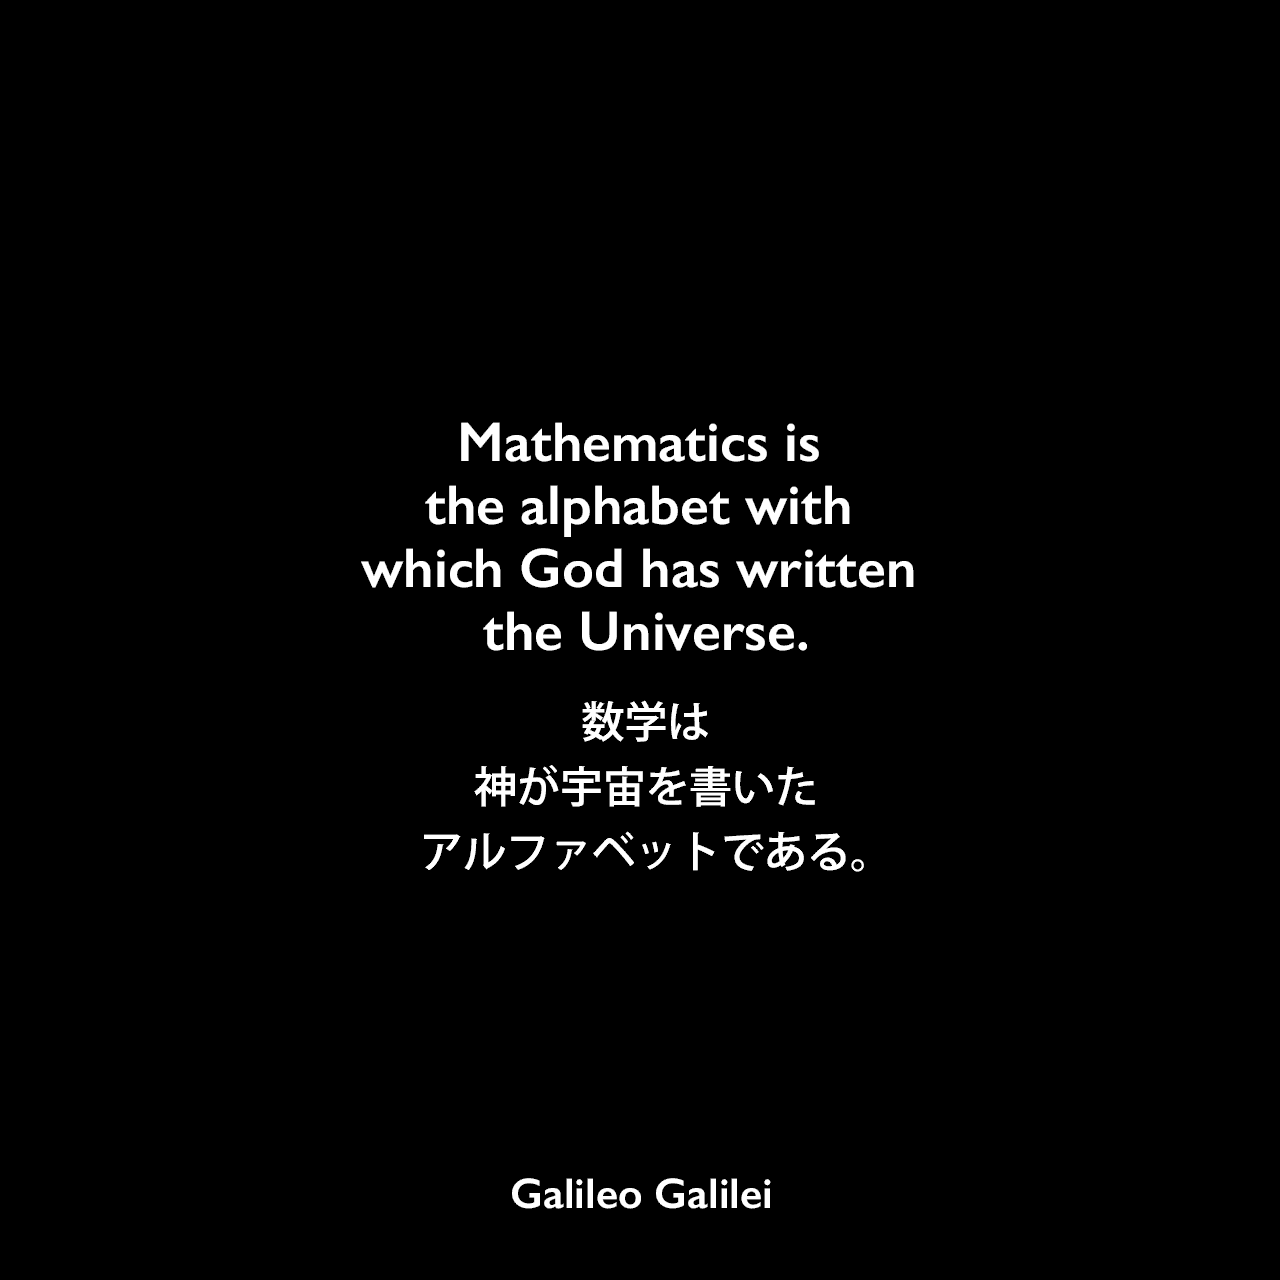 Mathematics is the alphabet with which God has written the Universe.数学は神が宇宙を書いたアルファベットである。Galileo Galilei